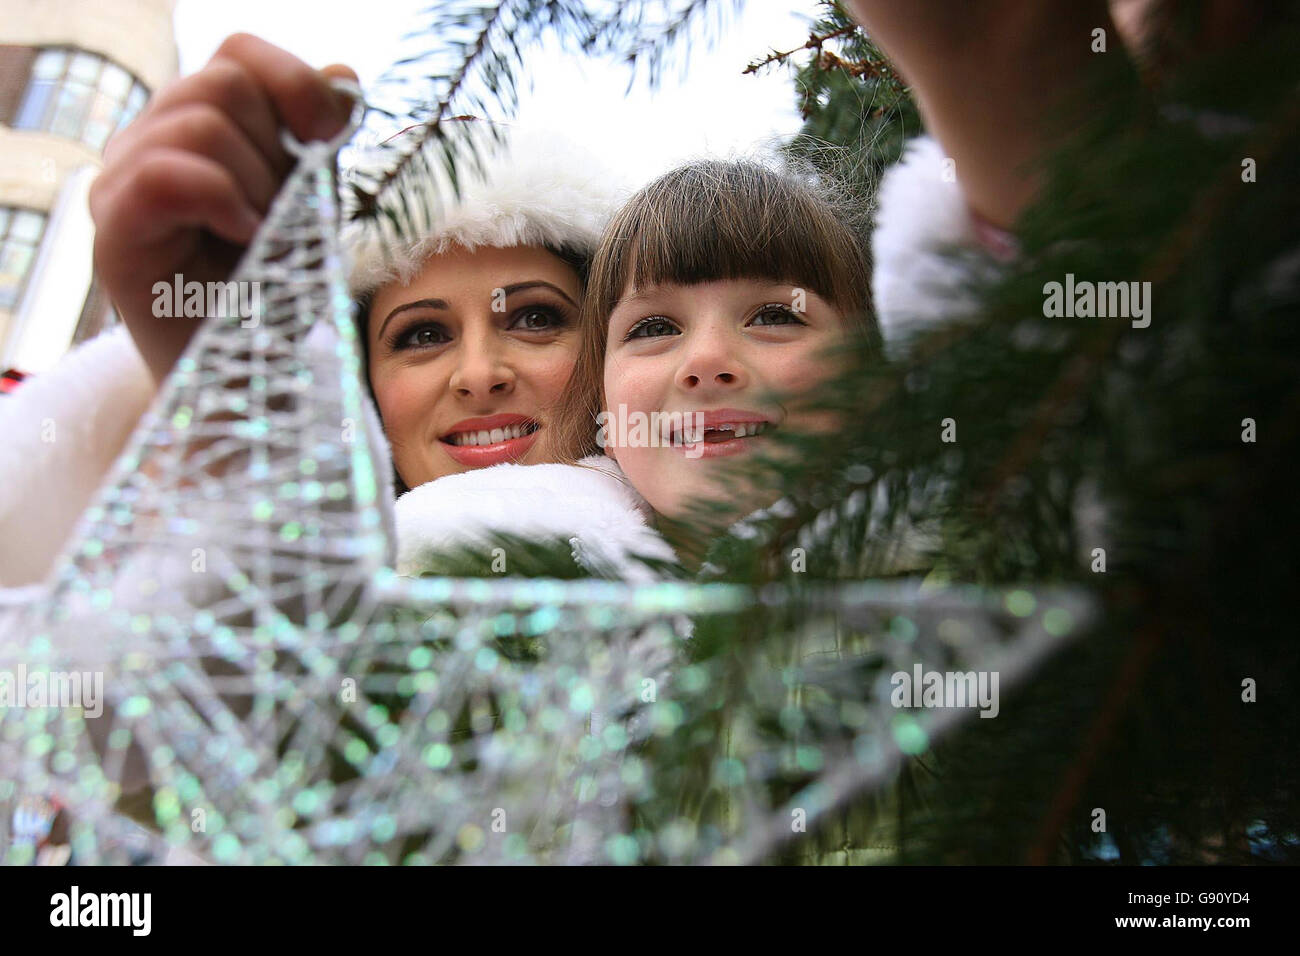 Sky Ireland TV presenter Grainne Seoige with Kate McDonald, 6, hangs a star on the Christmas Tree at Grafton Street, Dublin, Tuesday November 15, 2005. Homeless charity Focus Ireland hopes the tree and its 'Sponsor a Star' campaign will help raise 200,000 Euro to combat homelessness. Standalone photo. PRESS ASSOCIATION Photo. Photo credit should read: Julien Behal/PA. Stock Photo